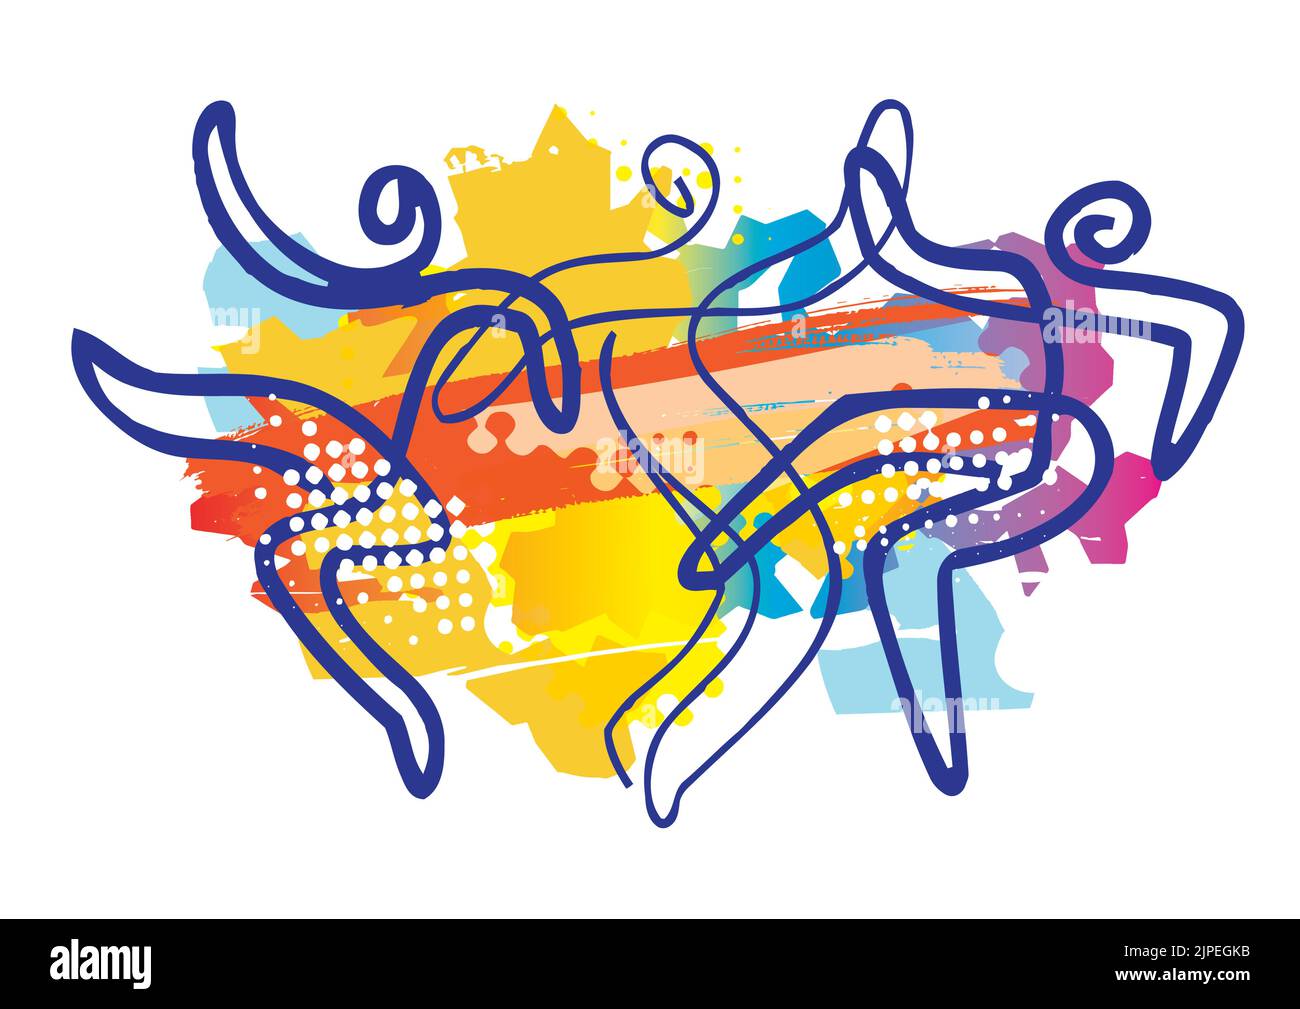 Lively dancing people, folk dance. Expressive, line art stylized illustrations of three dancing people on colorful abstract background. Stock Vector